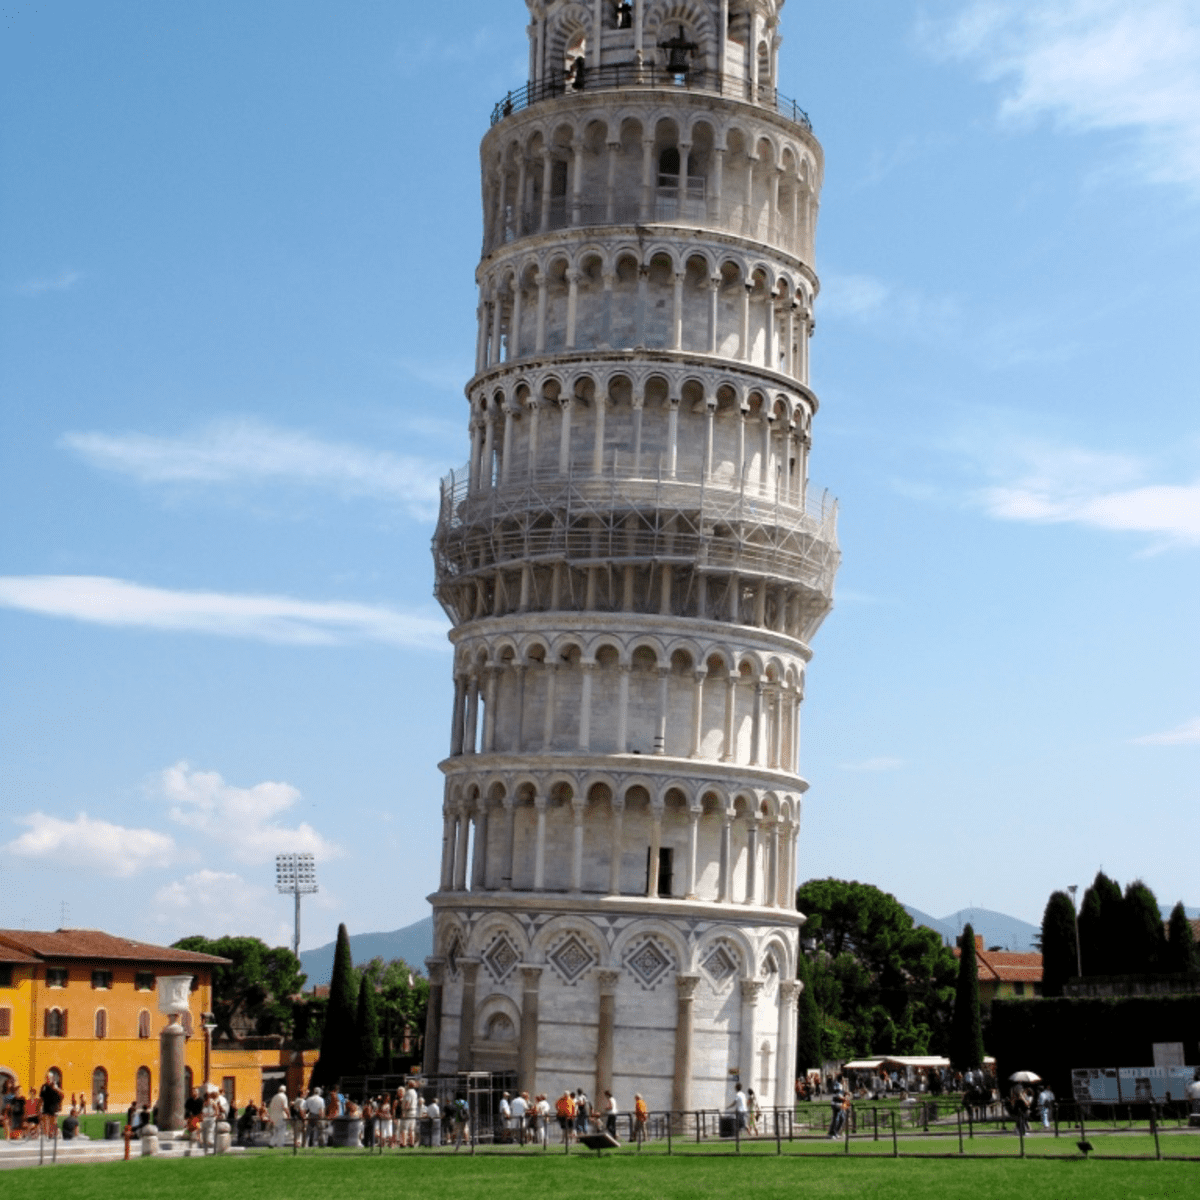 Guess who is the Leaning Tower of Pisa - Traveling Chapati